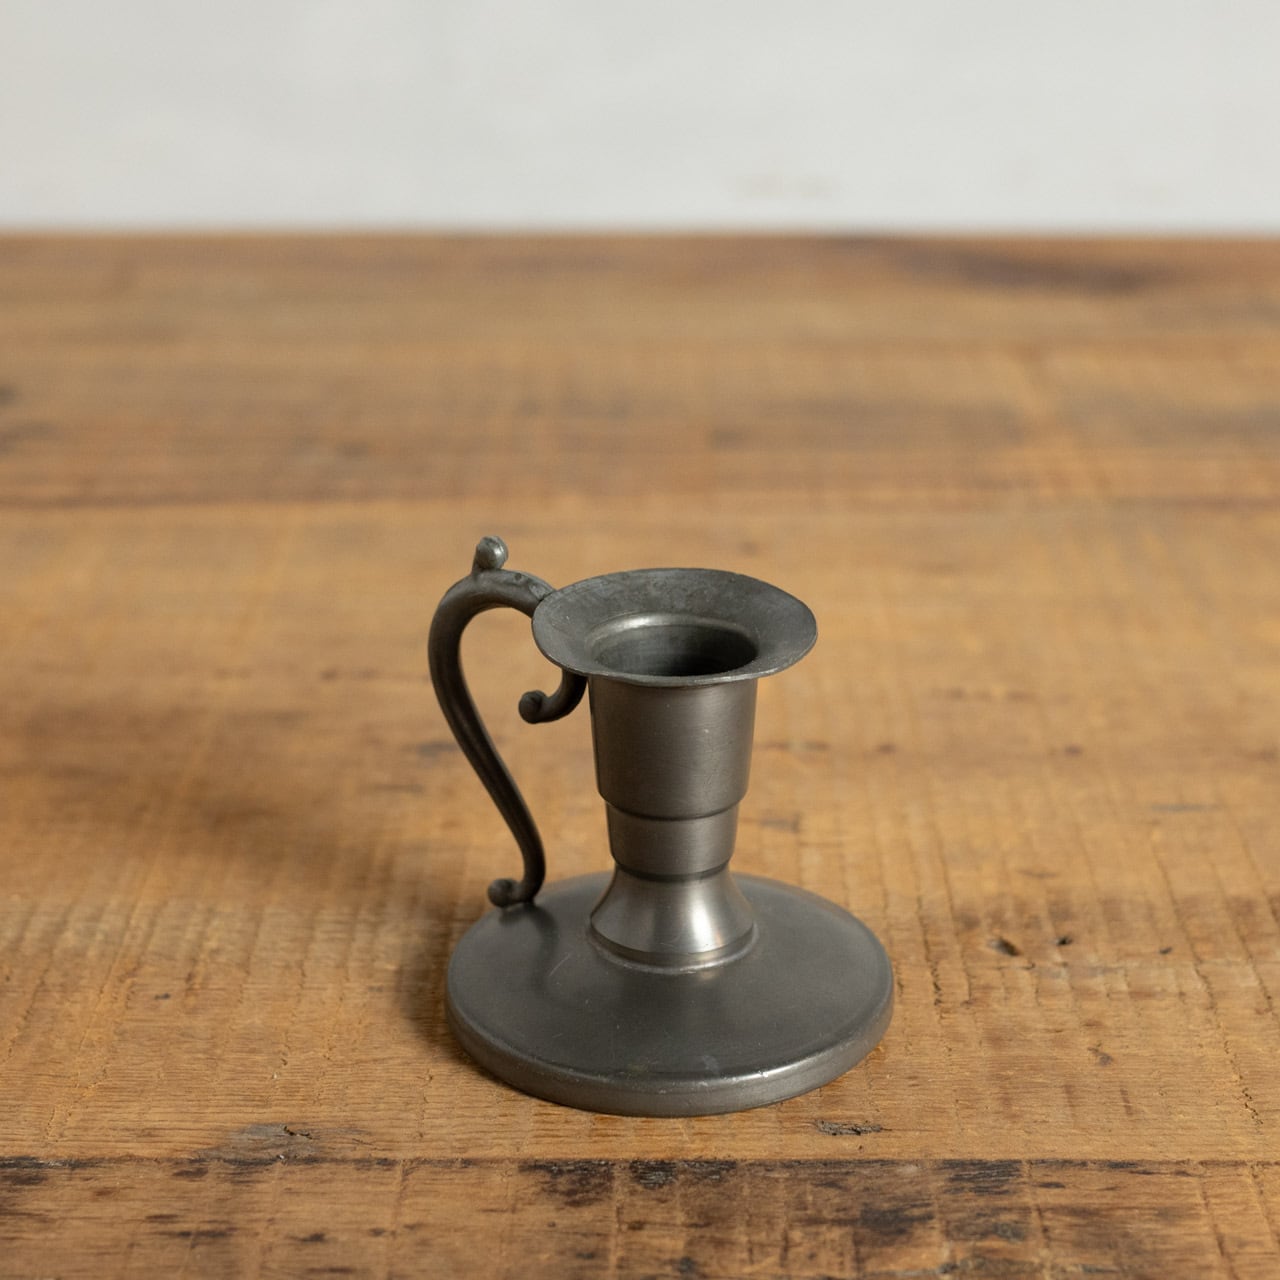 Pewter Candle Stand / ピューター キャンドルスタンド  〈キャンドルホルダー・燭台・ろうそく・オブジェ・アンティーク・ヴィンテージ〉113003 | SHABBY'S MARKETPLACE　 アンティーク・ヴィンテージ 家具や雑貨のお店 powered by BASE